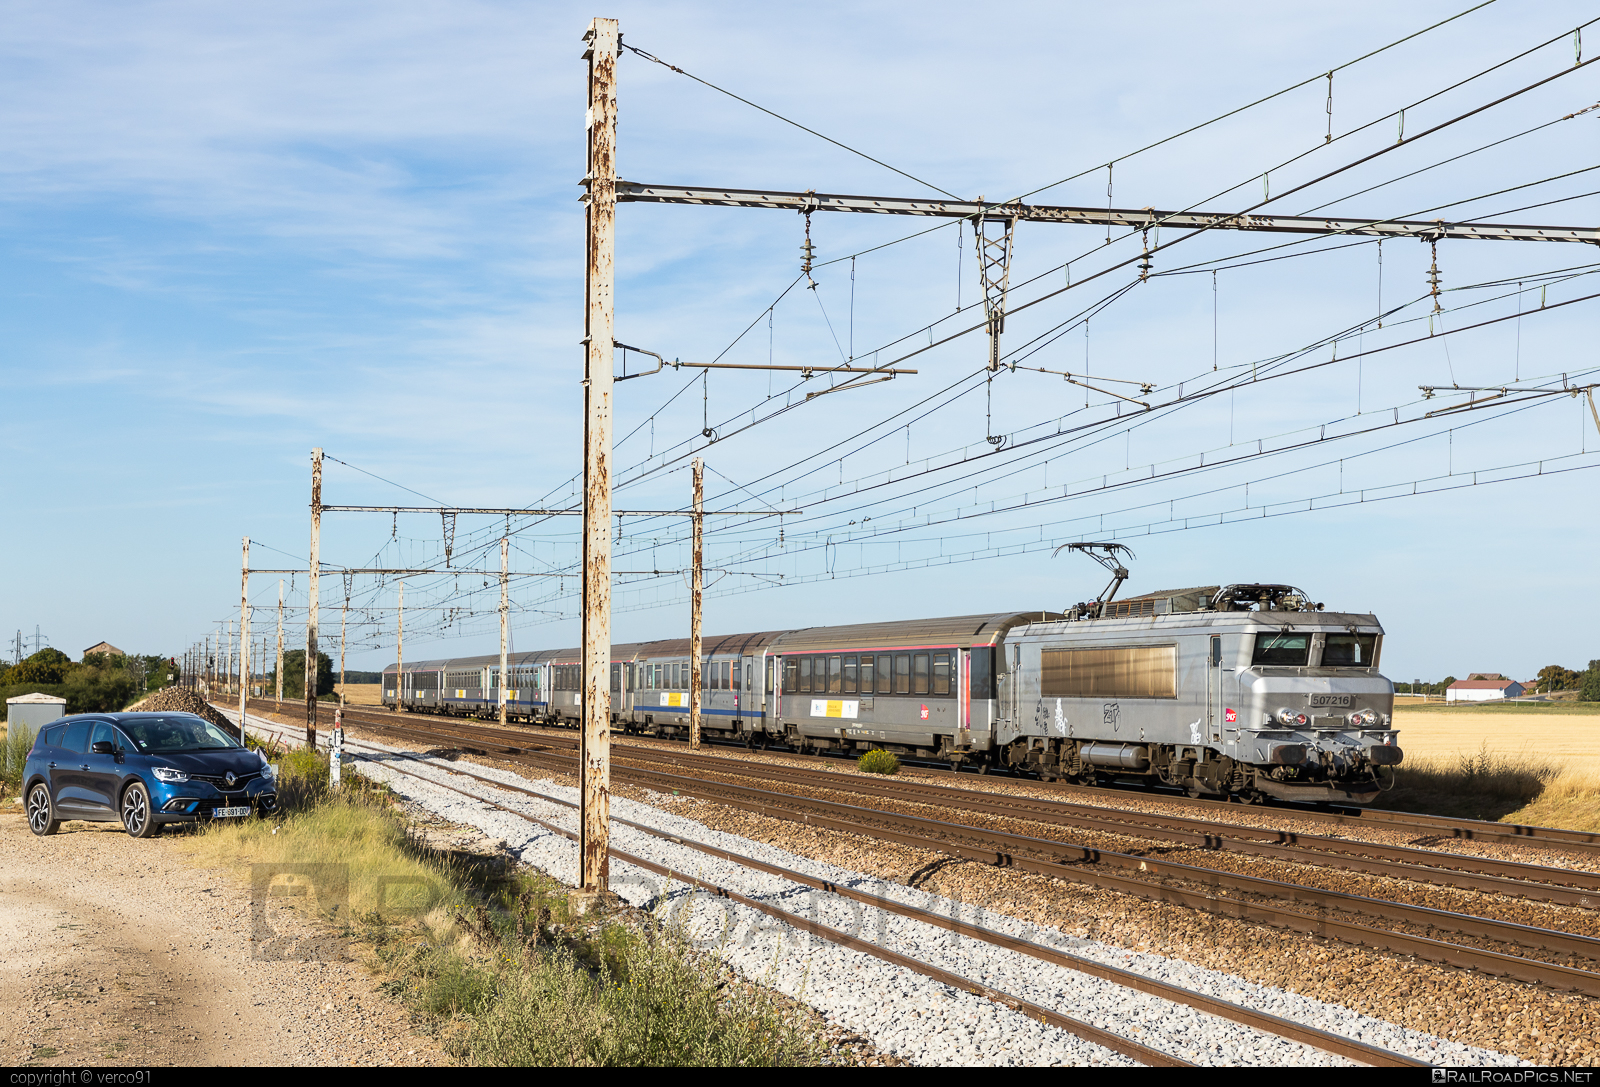 SNCF Class BB 7200 - 507216 operated by SNCF Voyageurs #nezCasse #sncf #sncfClassBb7200 #sncfVoyageurs #sncfvoyageurs